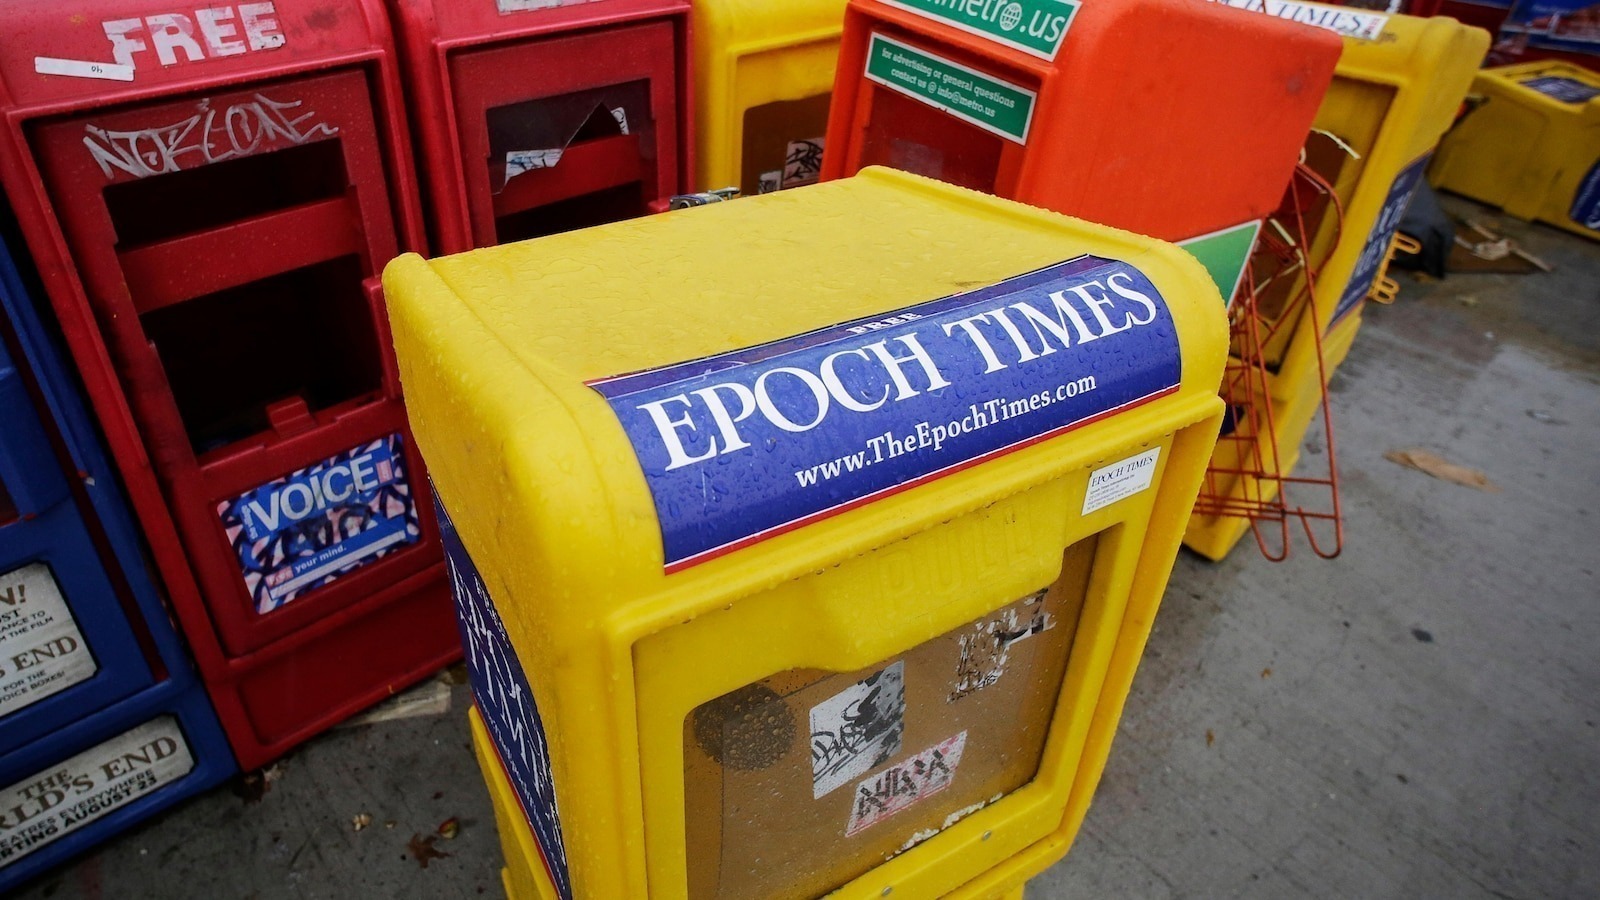 What will happen to The Epoch Times, whose chief financial officer is accused of money laundering?